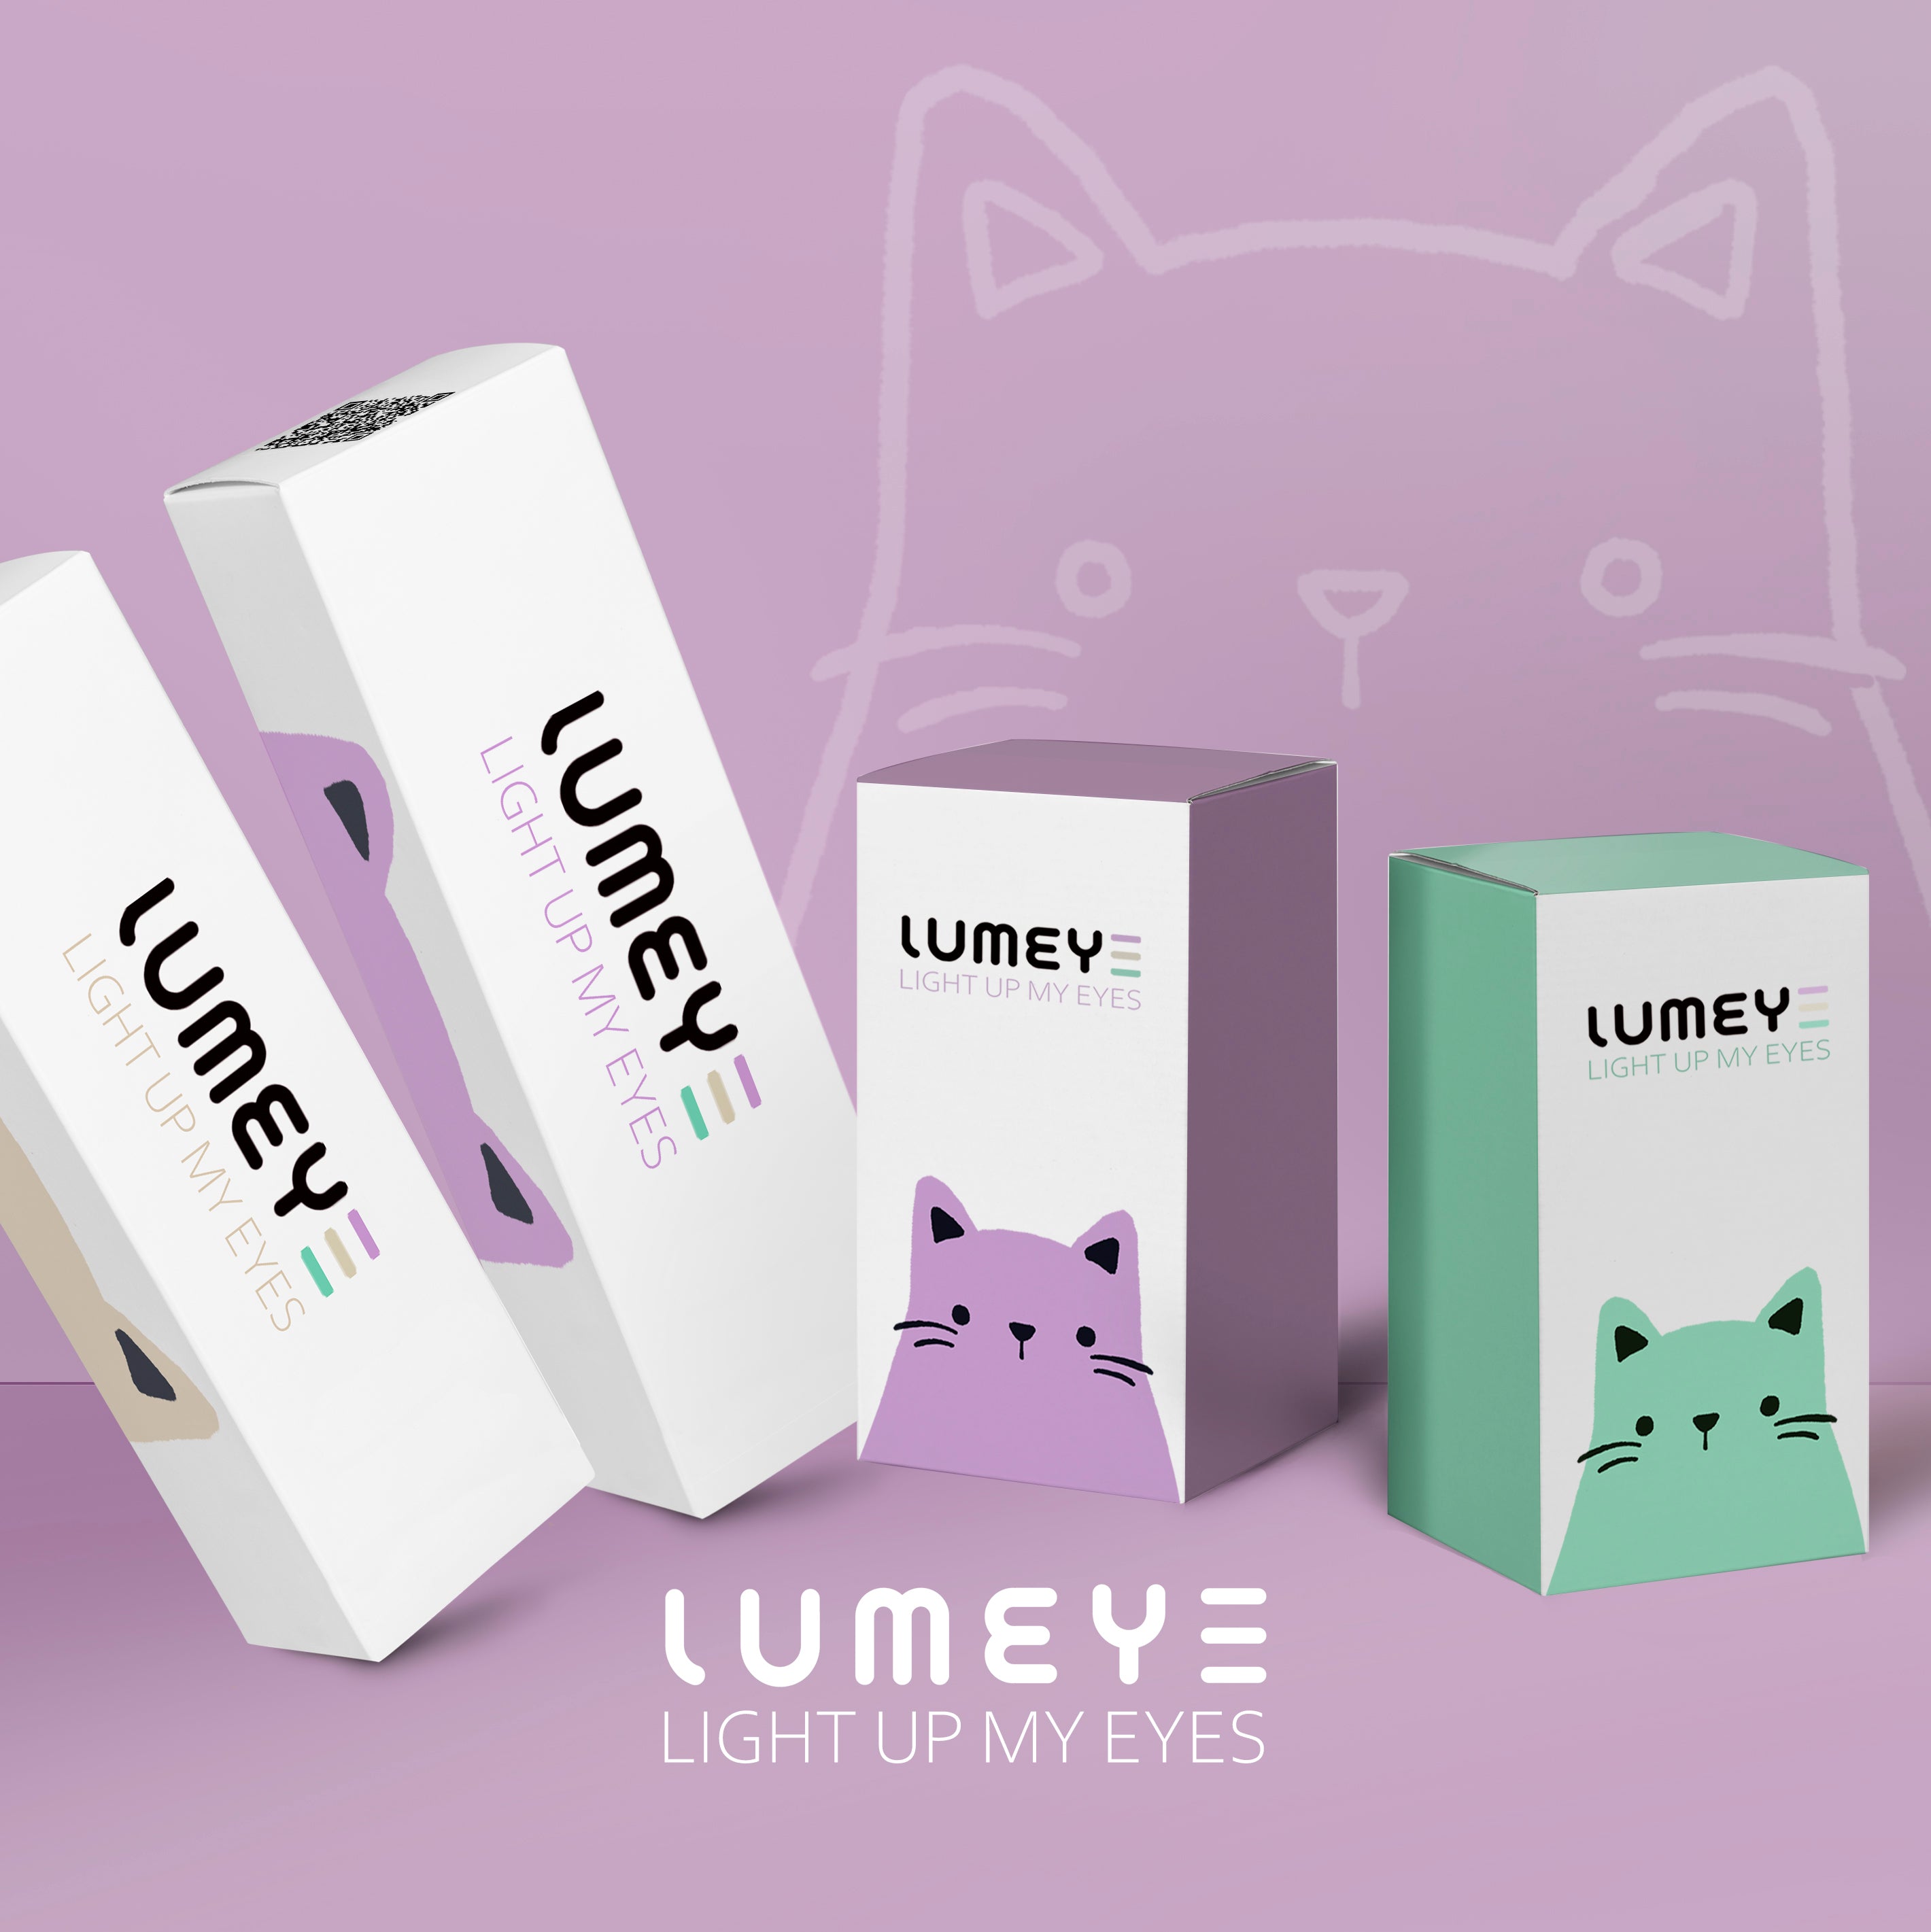 Best COLORED CONTACTS - LUMEYE Crazy Red Colored Contact Lenses - LUMEYE